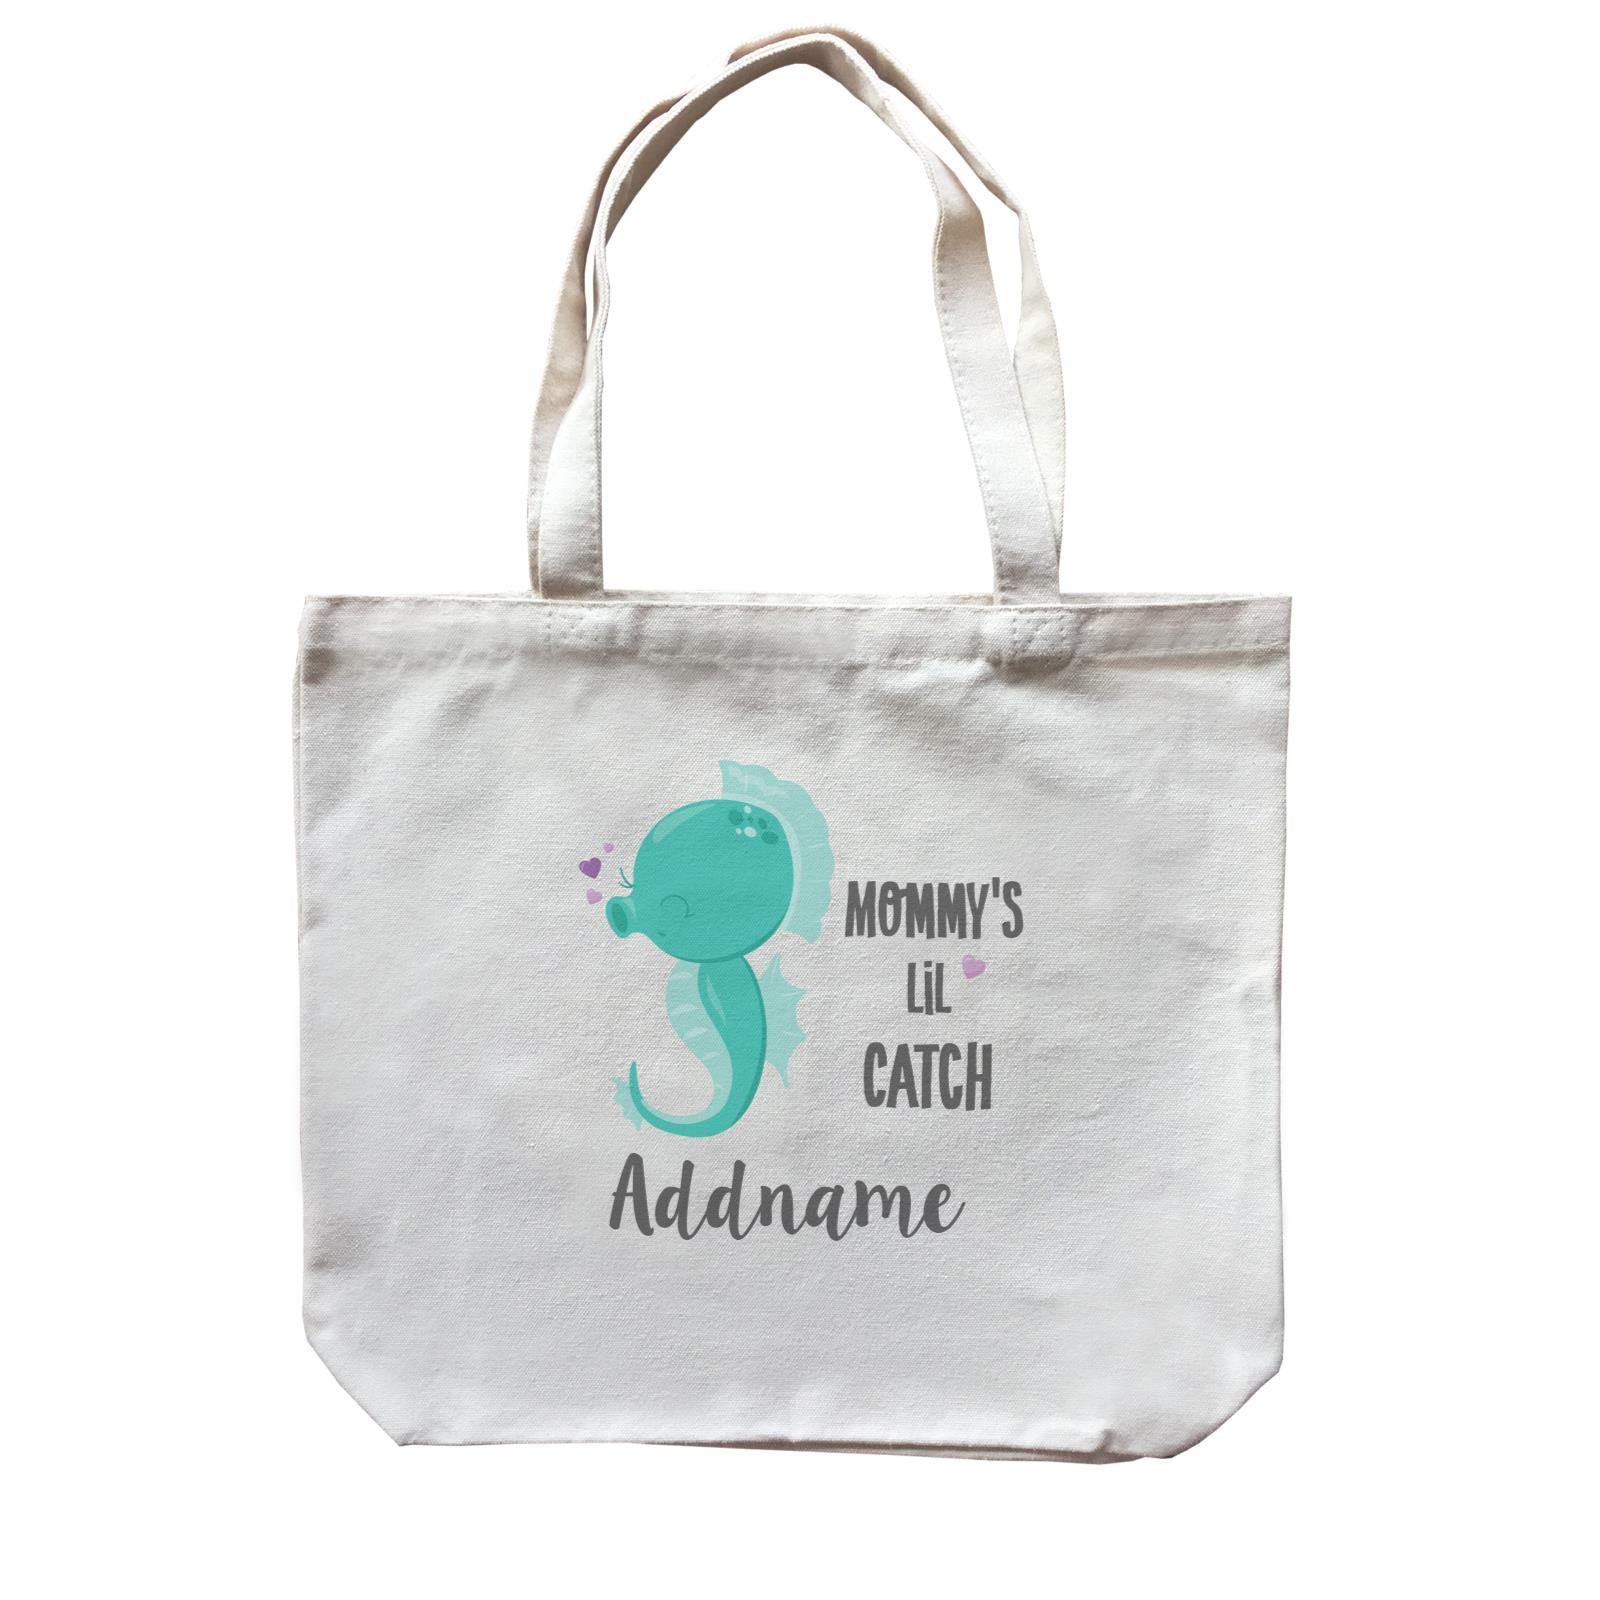 Cute Sea Animals Green Seahorse Mommy's Lil Catch Addname Canvas Bag